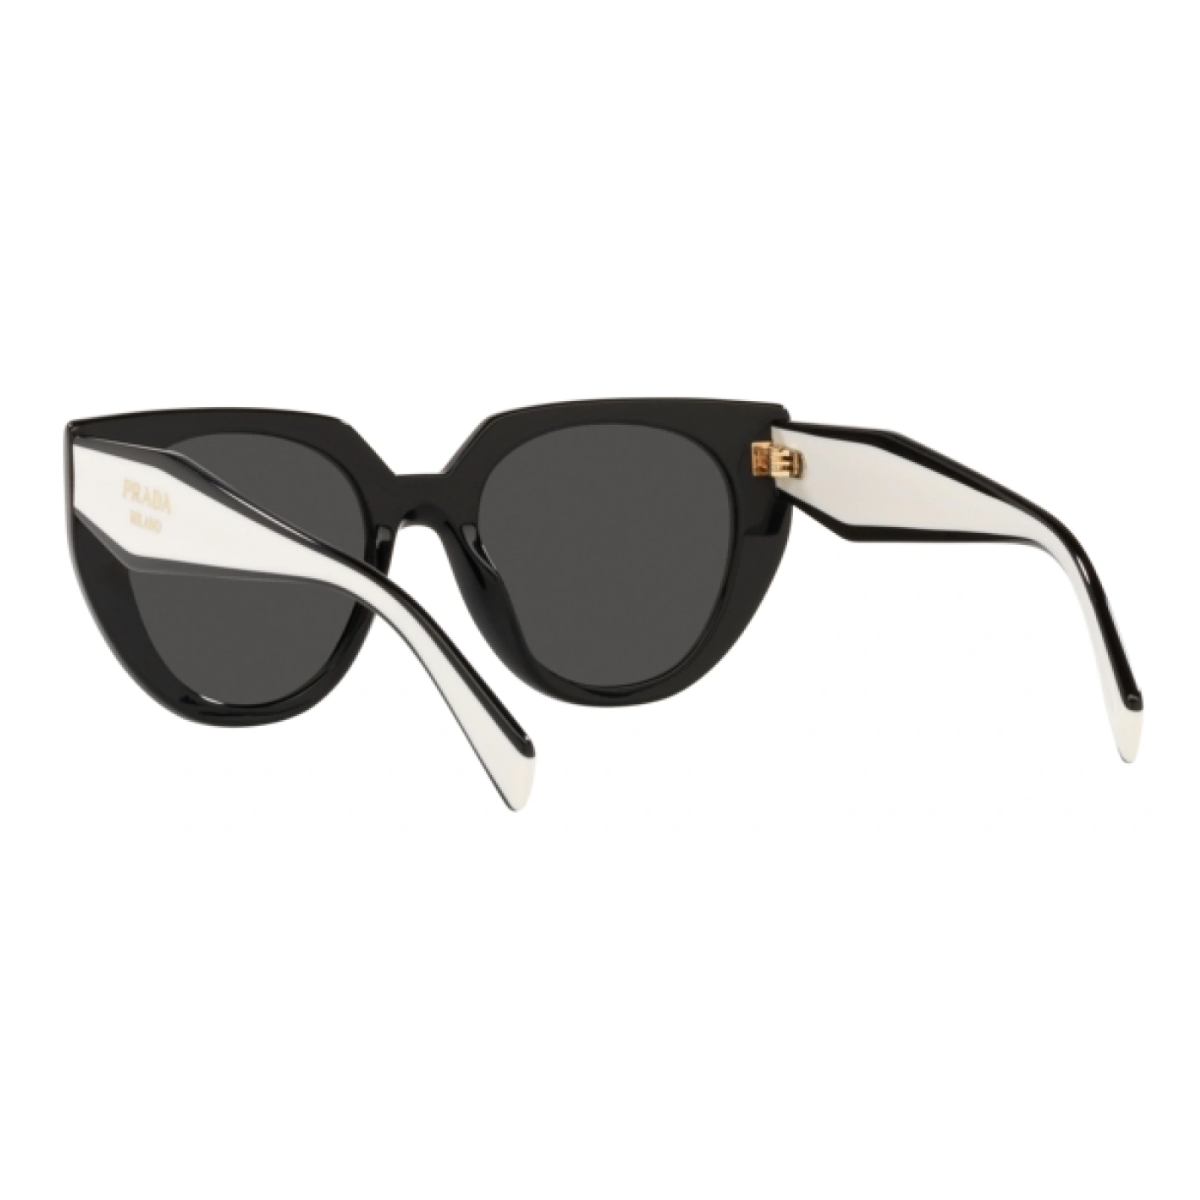 "Elevate your look with Prada cat eye shades in shiny black and grey lenses, perfect for fashion-conscious women seeking chic eyewear from Optorium."